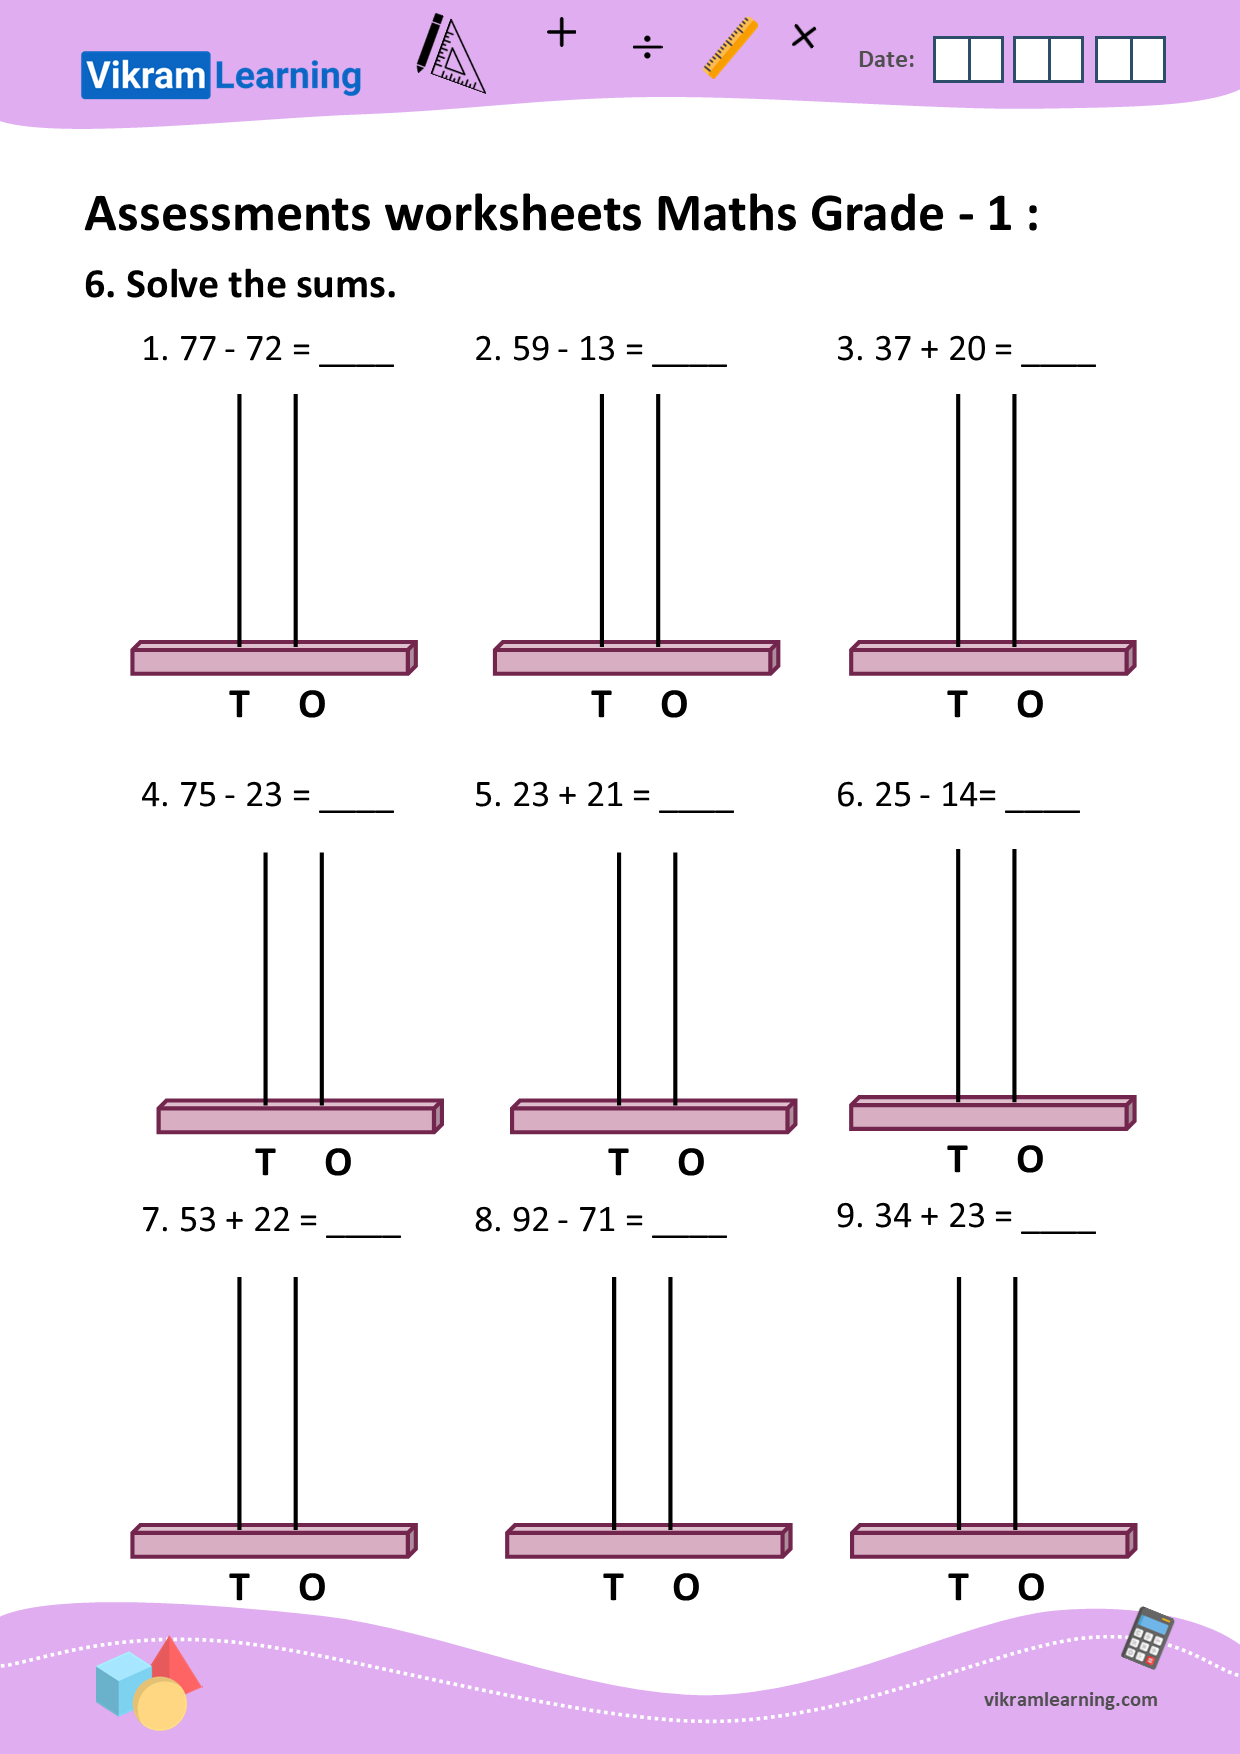 Download assessments worksheets maths grade - 1, additions, subtraction, and geometry worksheets